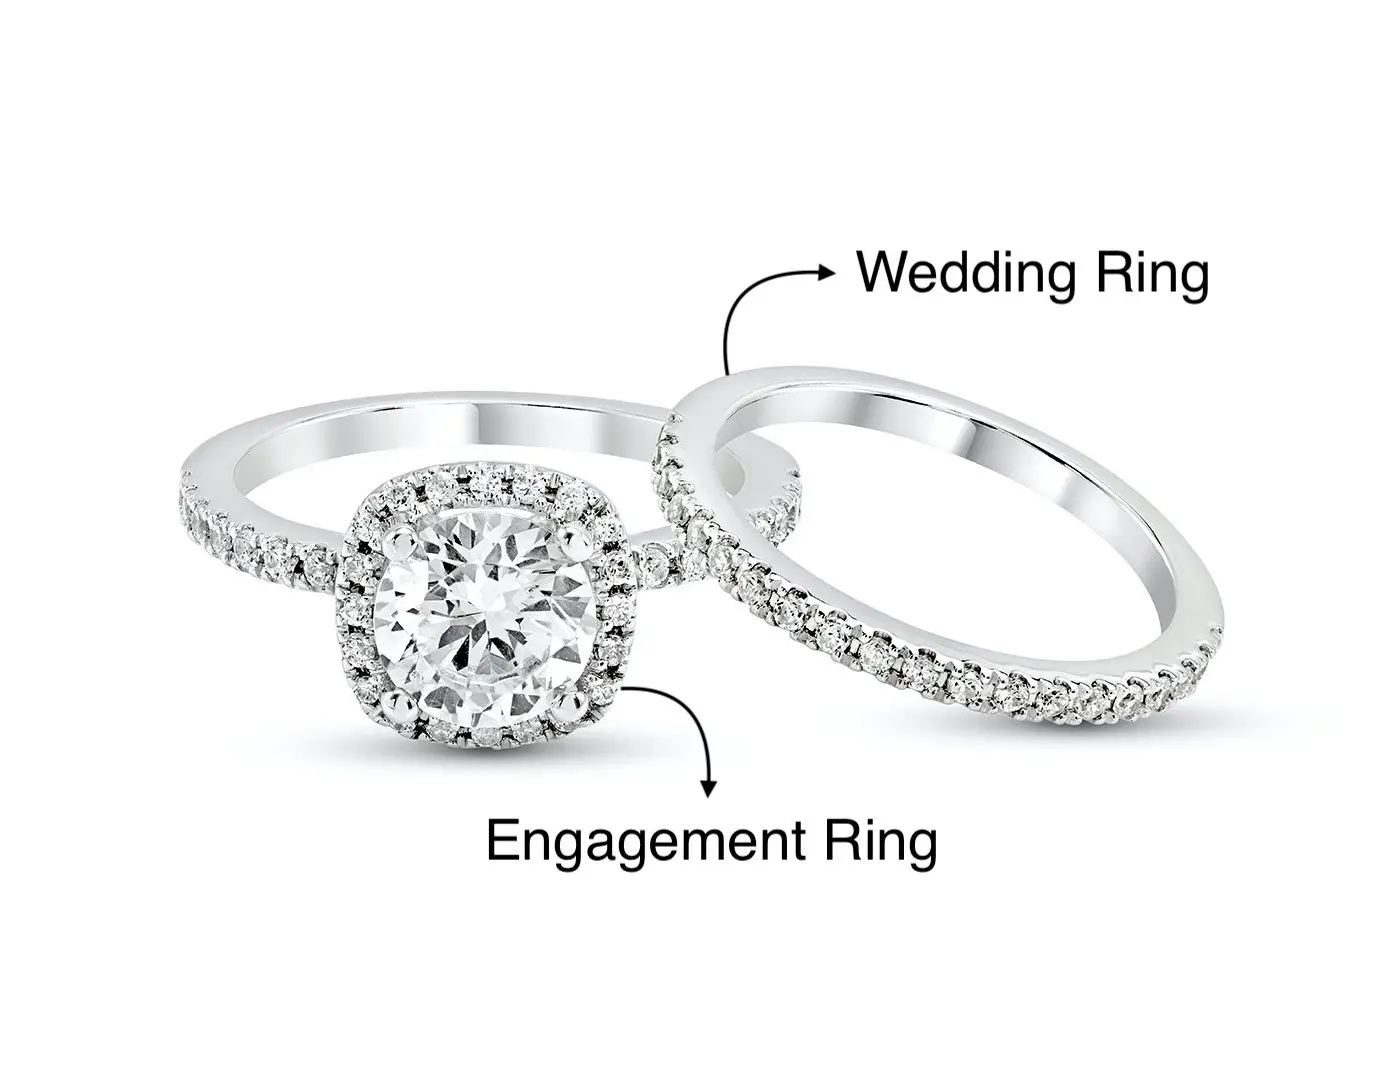 Difference between engagement ring and wedding ring